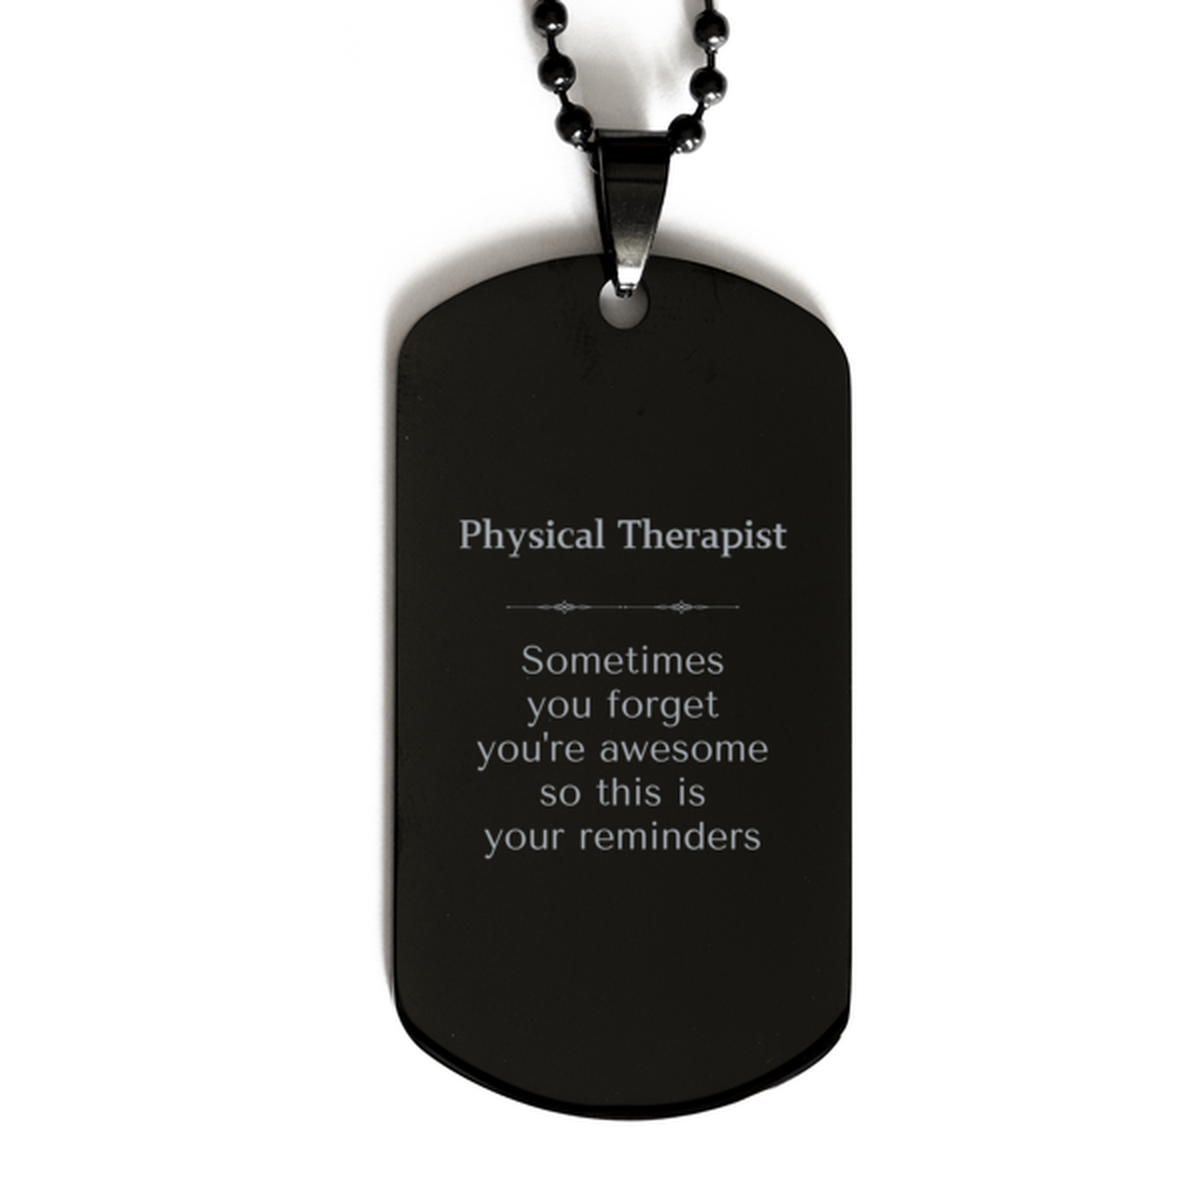 Sentimental Physical Therapist Black Dog Tag, Physical Therapist Sometimes you forget you're awesome so this is your reminders, Graduation Christmas Birthday Gifts for Physical Therapist, Men, Women, Coworkers